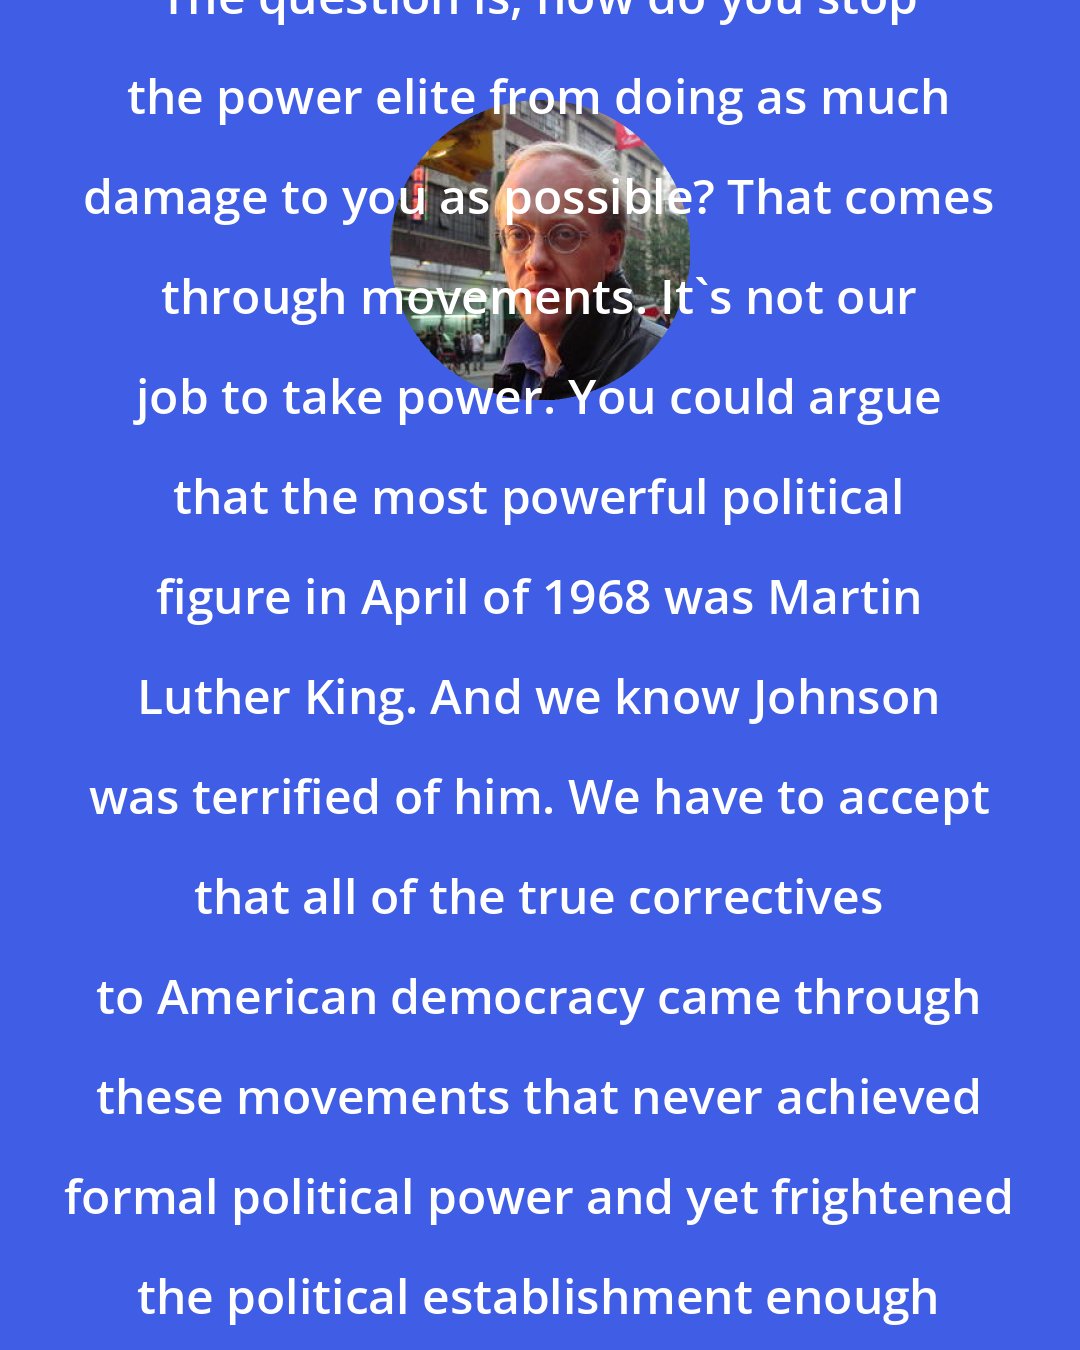 Chris Hedges: The question is, how do you stop the power elite from doing as much damage to you as possible? That comes through movements. It's not our job to take power. You could argue that the most powerful political figure in April of 1968 was Martin Luther King. And we know Johnson was terrified of him. We have to accept that all of the true correctives to American democracy came through these movements that never achieved formal political power and yet frightened the political establishment enough to respond.